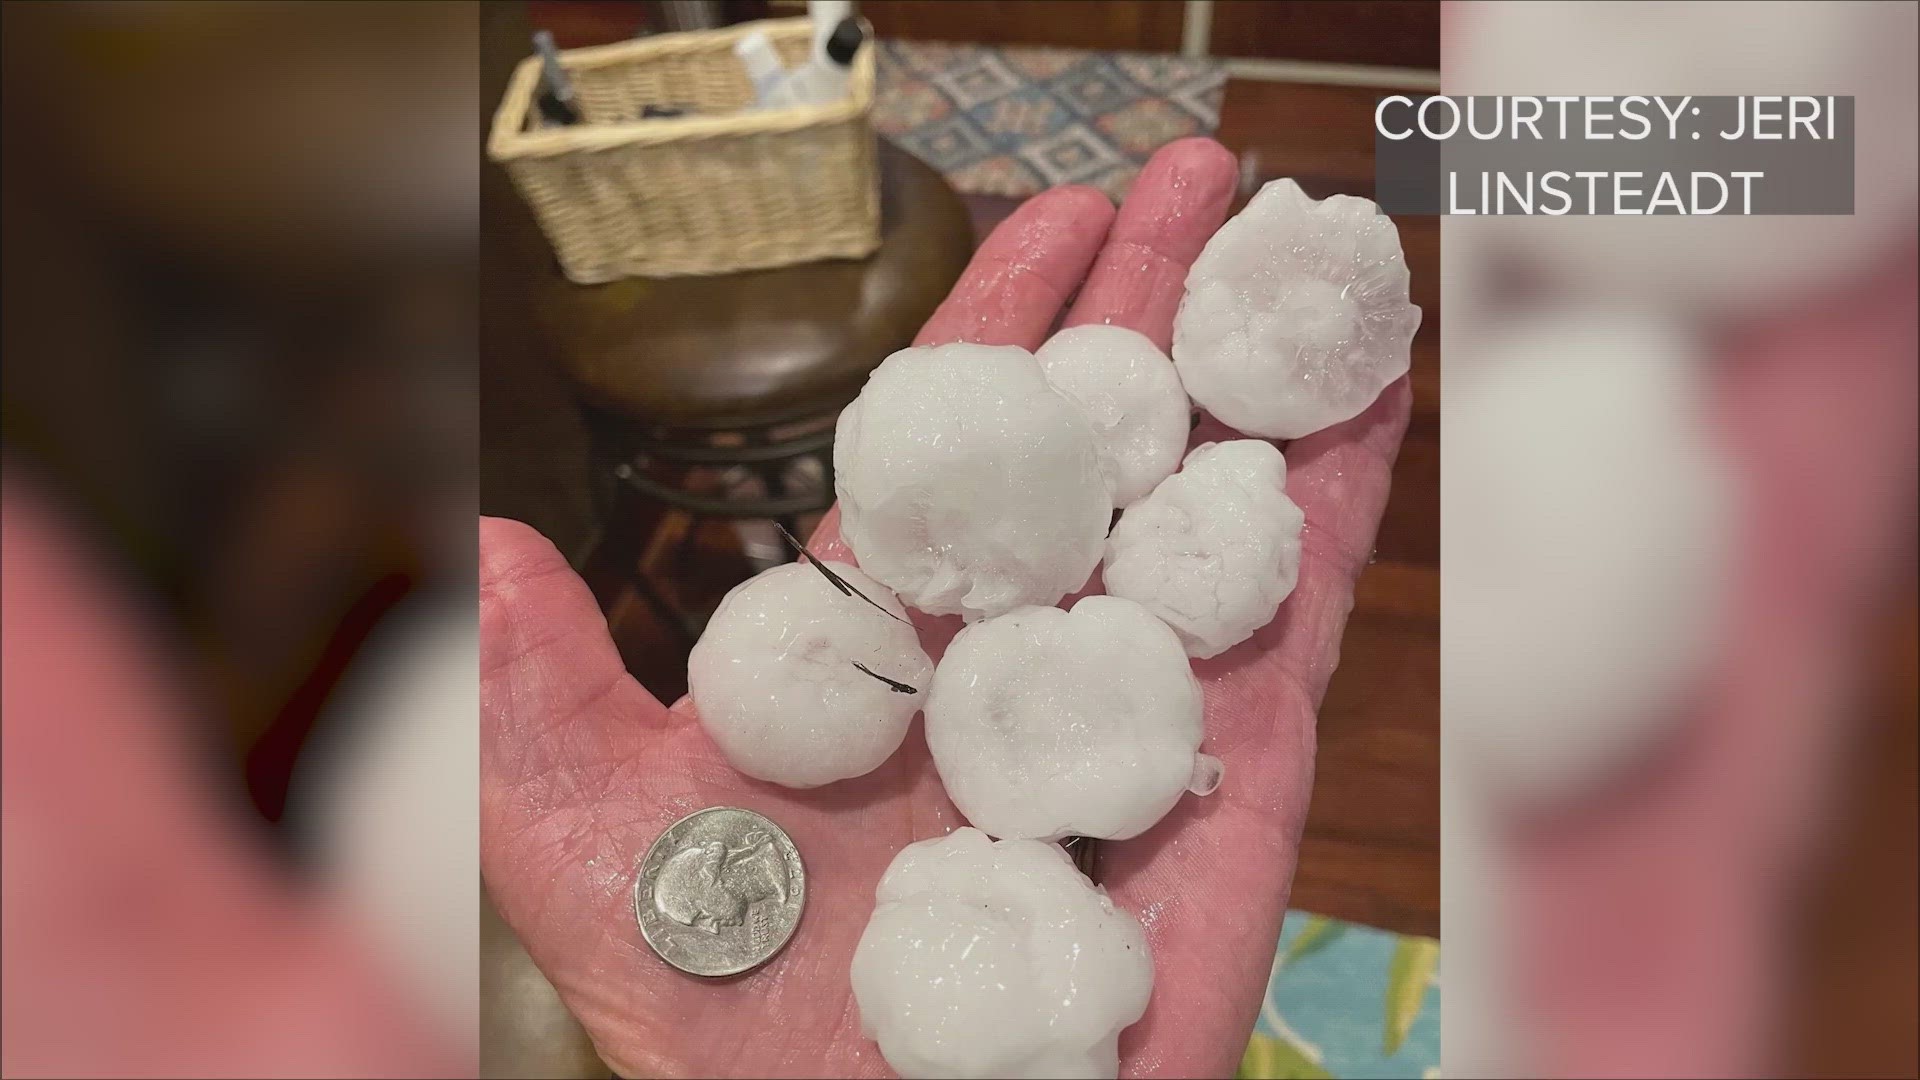 A line of severe thunderstorms moved through the San Antonio area Friday night, bringing large hail and strong winds on the last Friday of Fiesta.